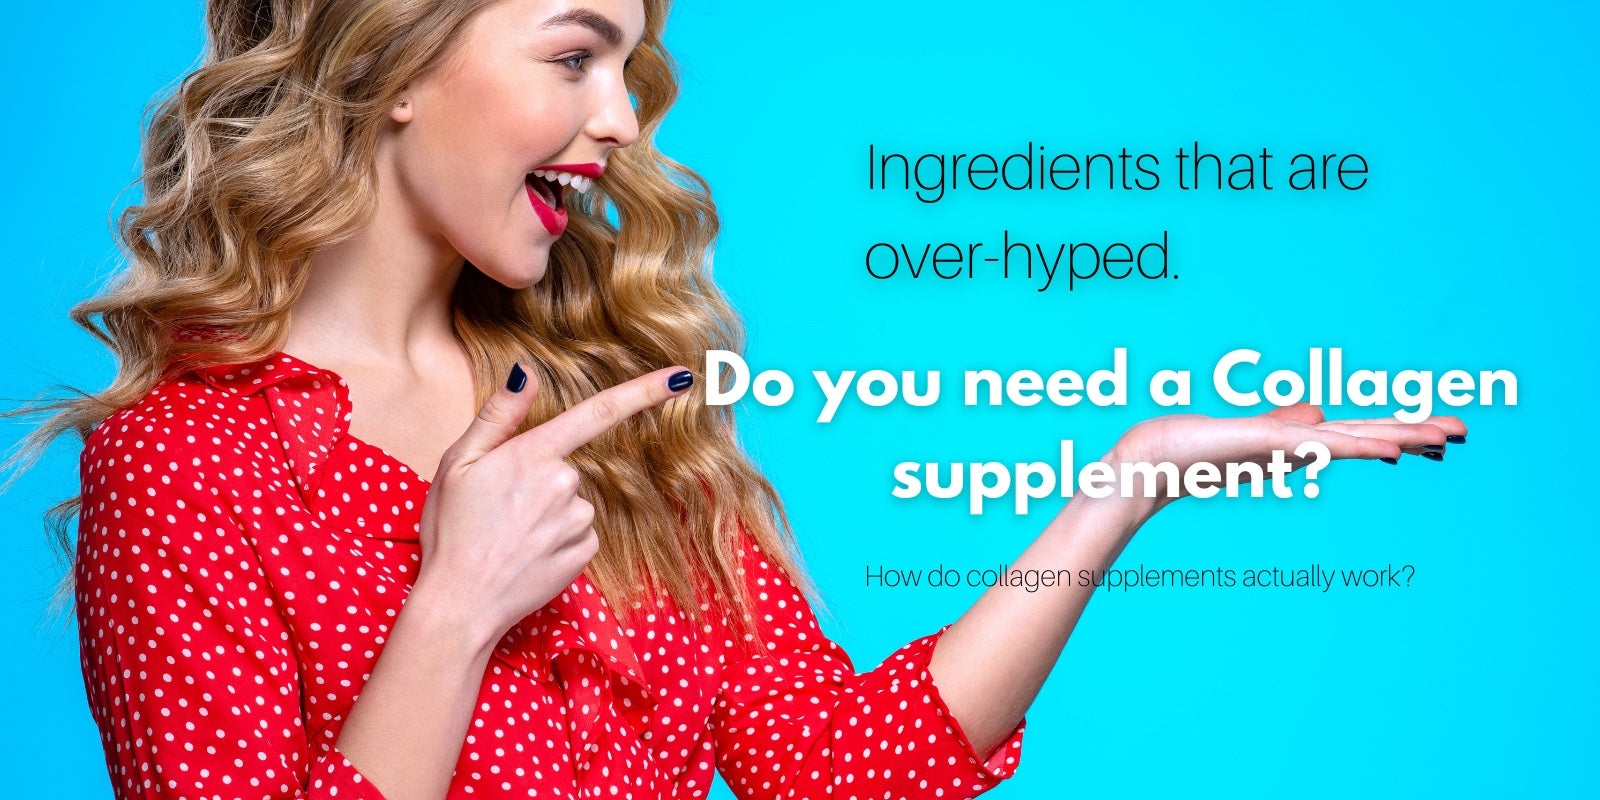 do collagen supplements actually do anything for the skin? Victoria BC Vancouver BC